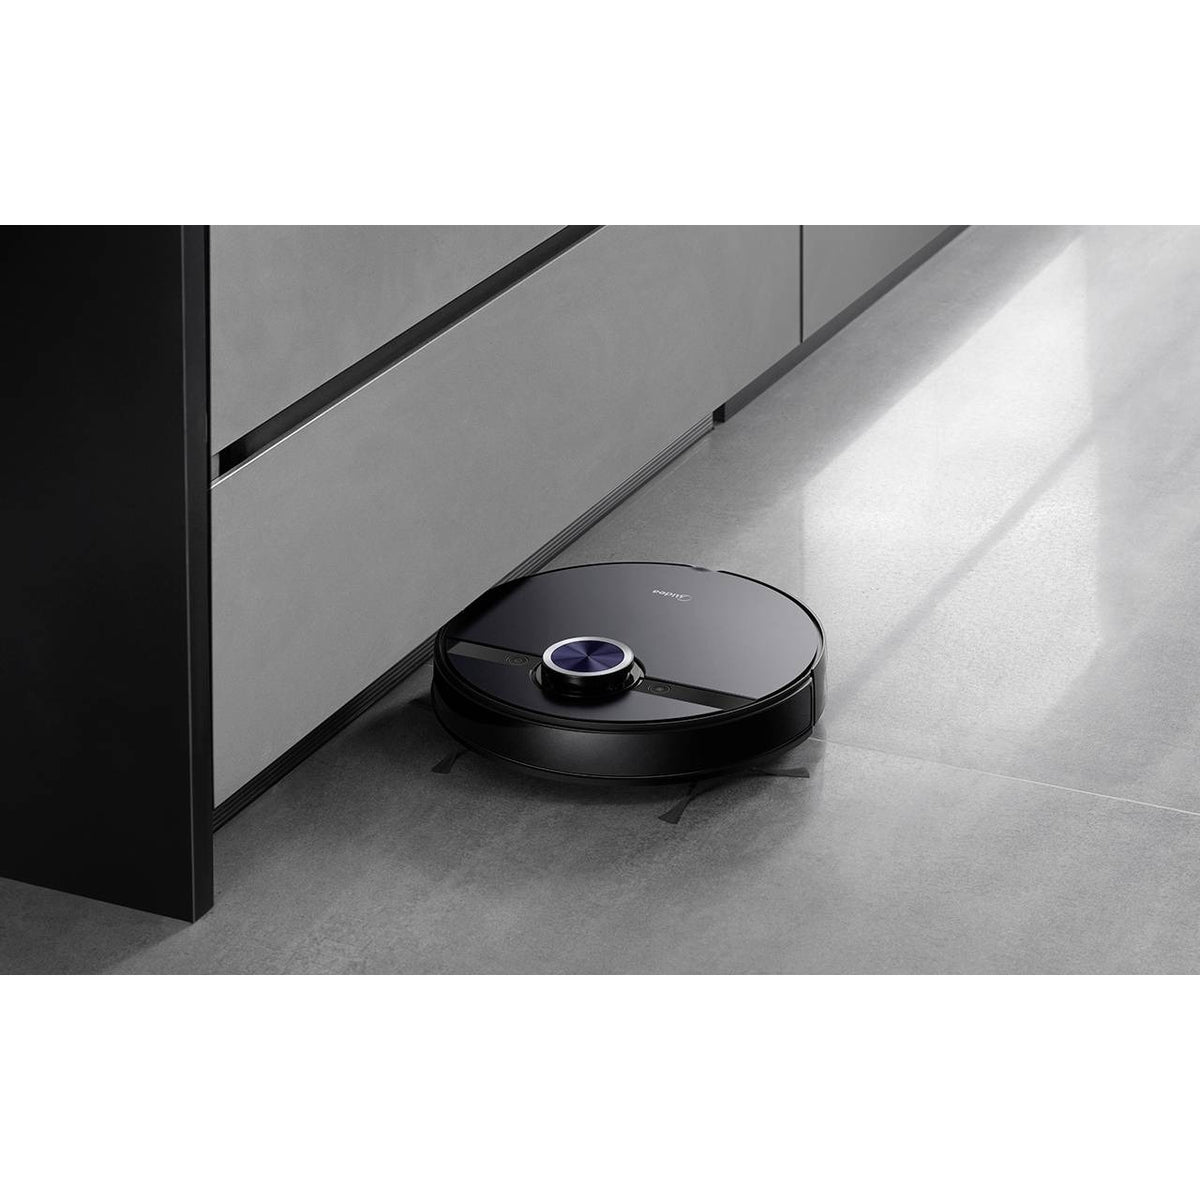 Midea S8+ Robot Vacuum Cleaner - Black | S8+ from Midea - DID Electrical